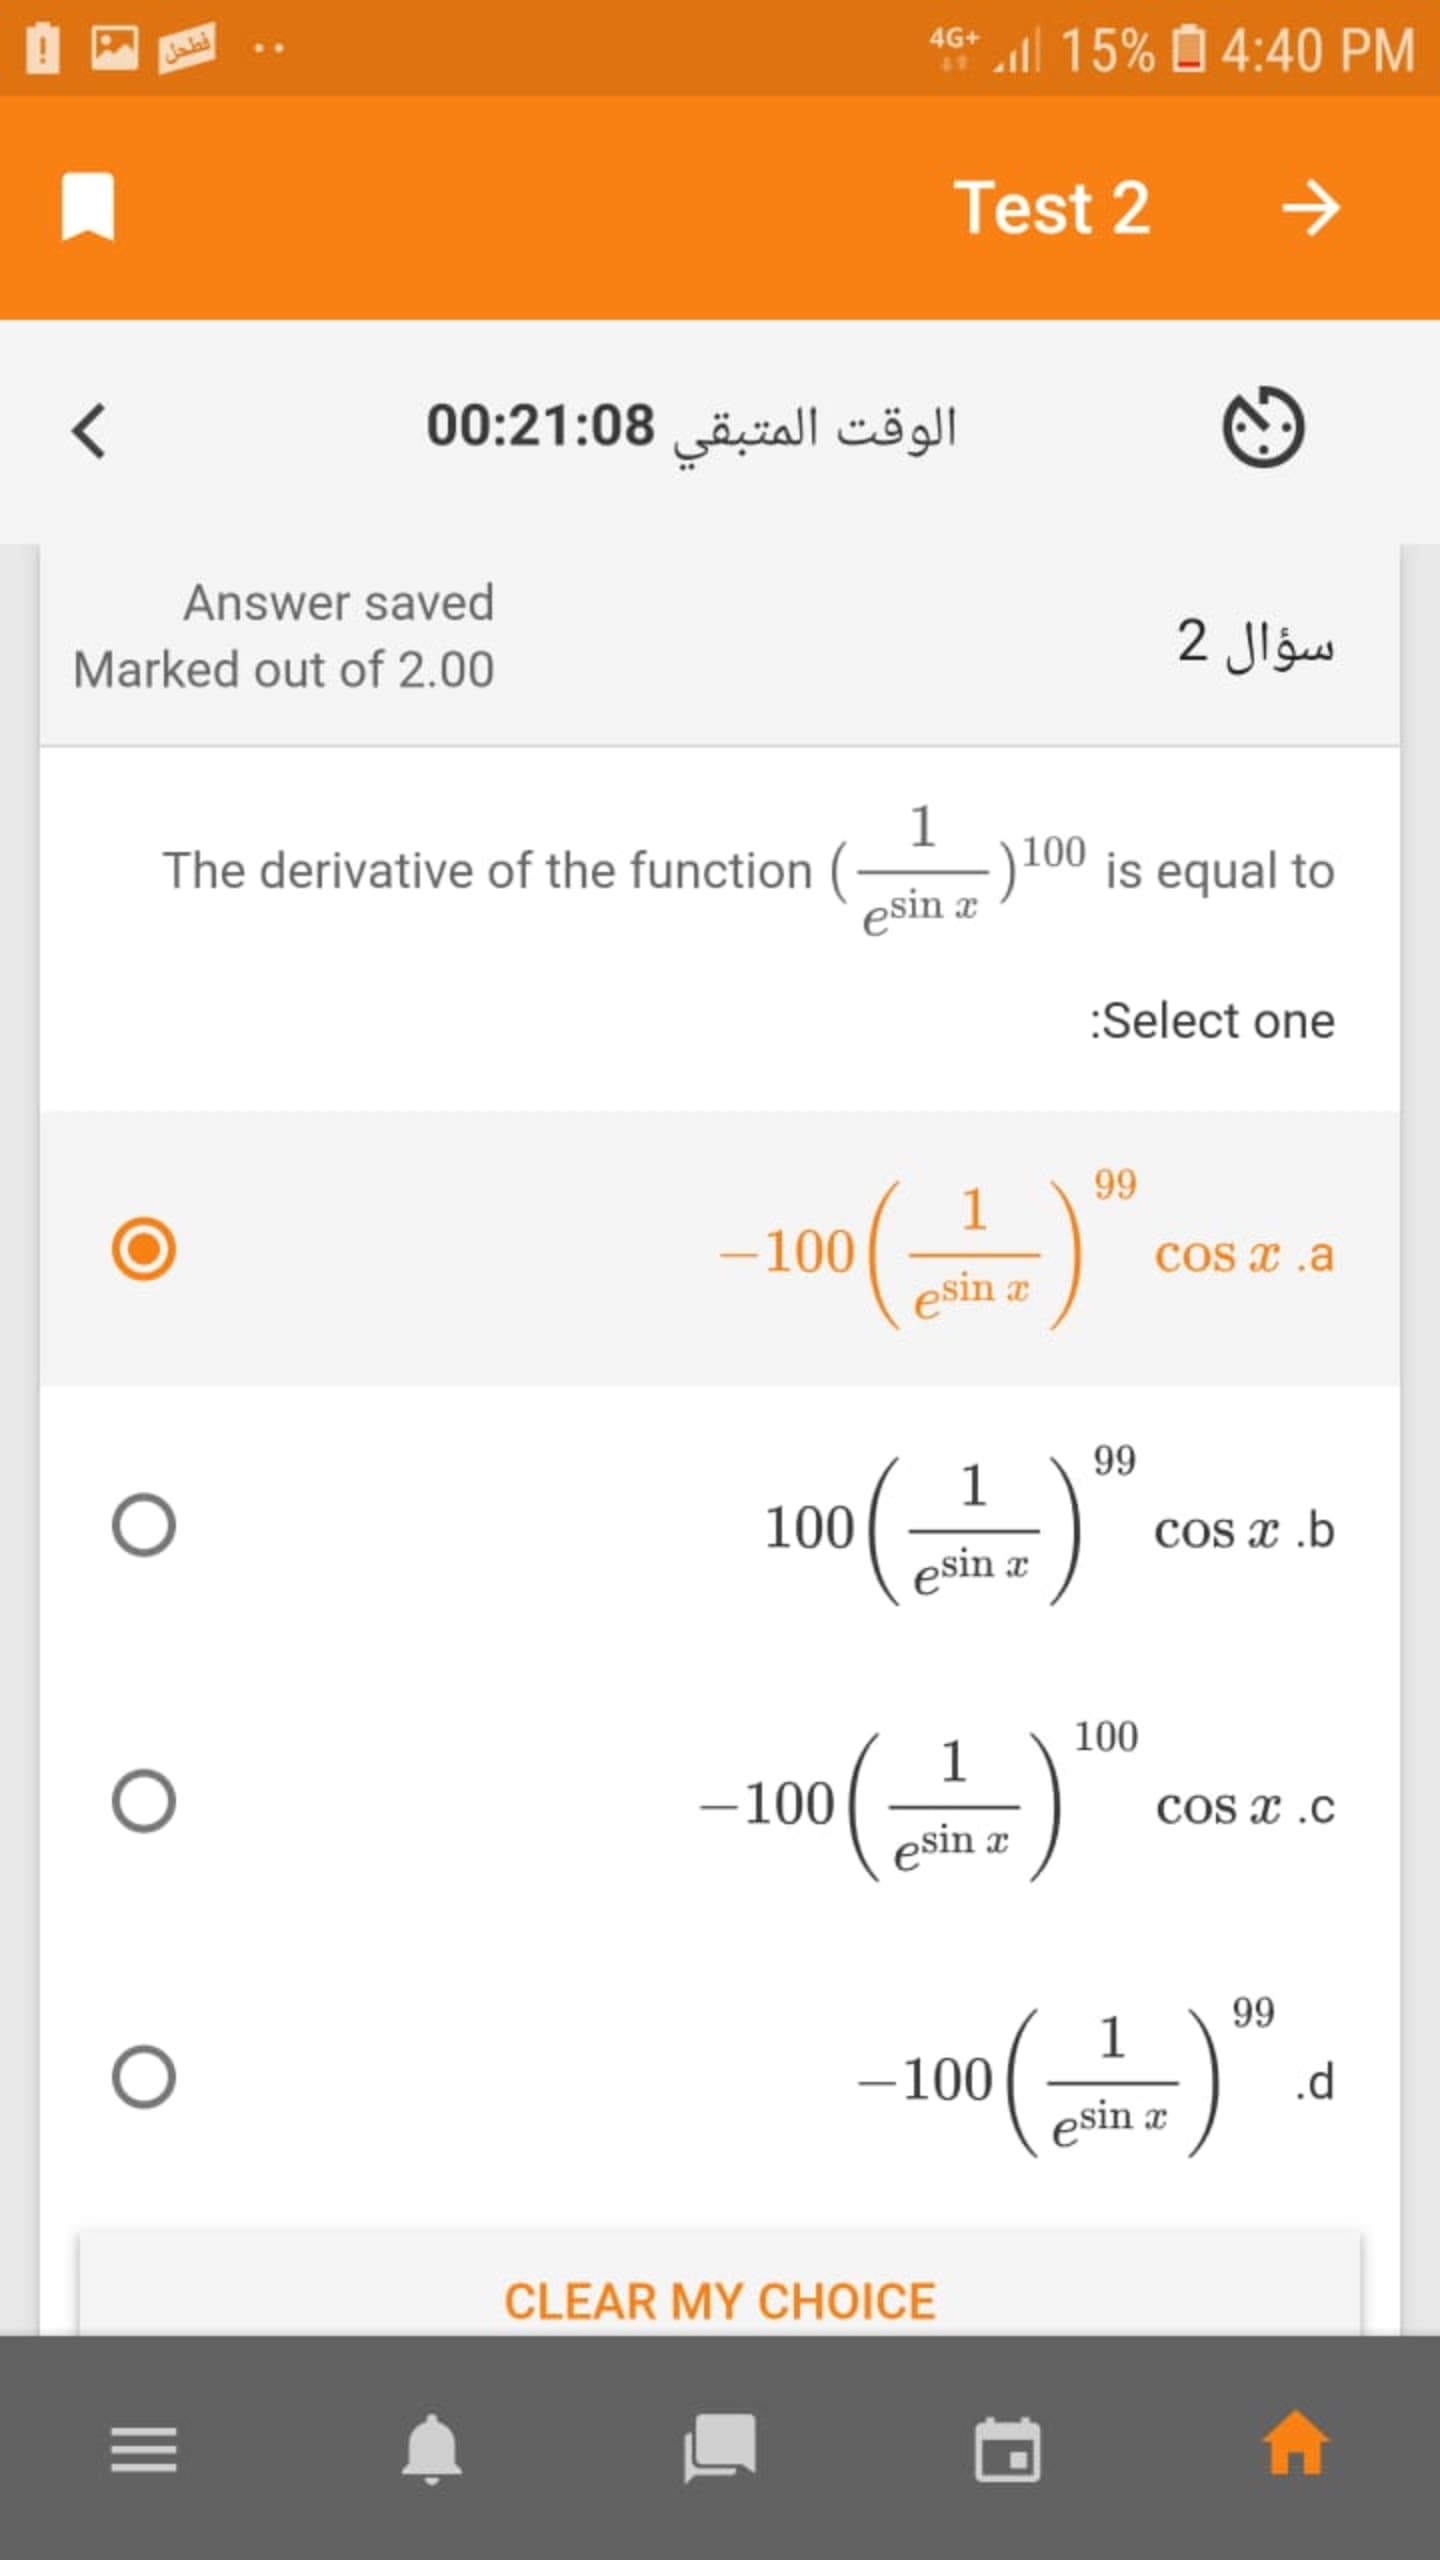 1
:) 100 is equal to
The derivative of the function
esin x
